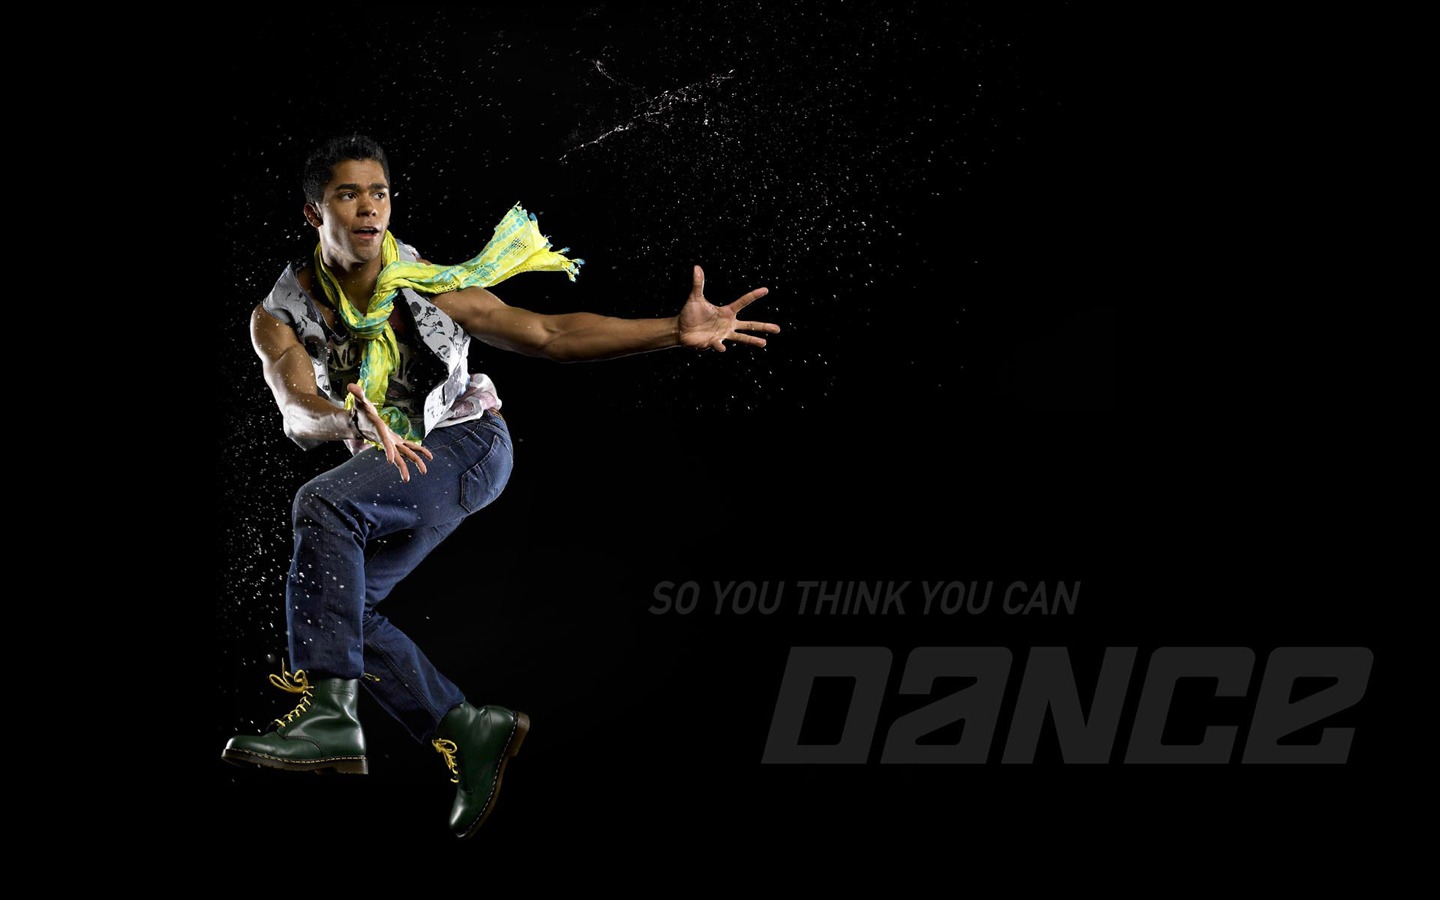 So You Think You Can Dance 舞林争霸 壁纸(一)2 - 1440x900